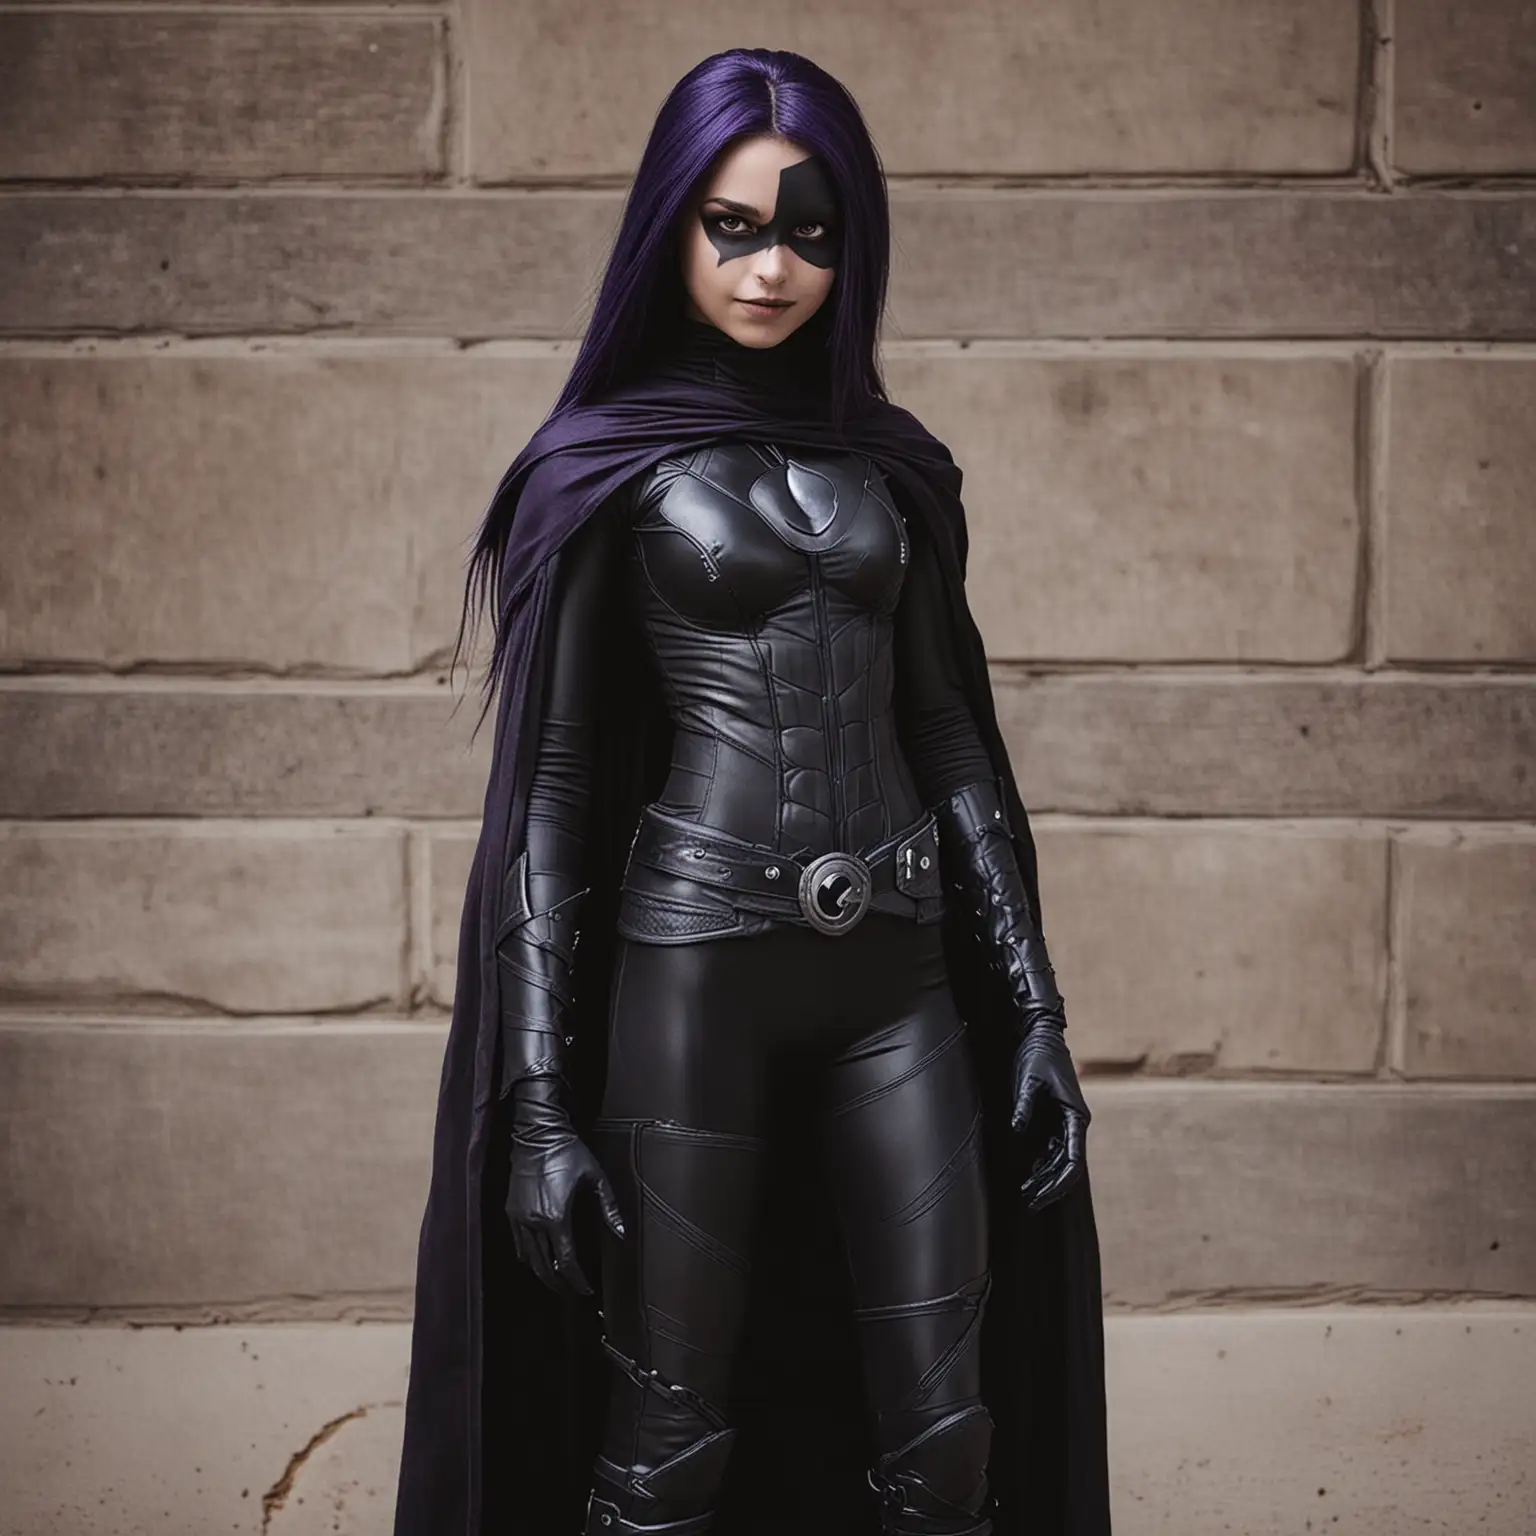 14 year old white girl dressed as Raven from Teen Titans